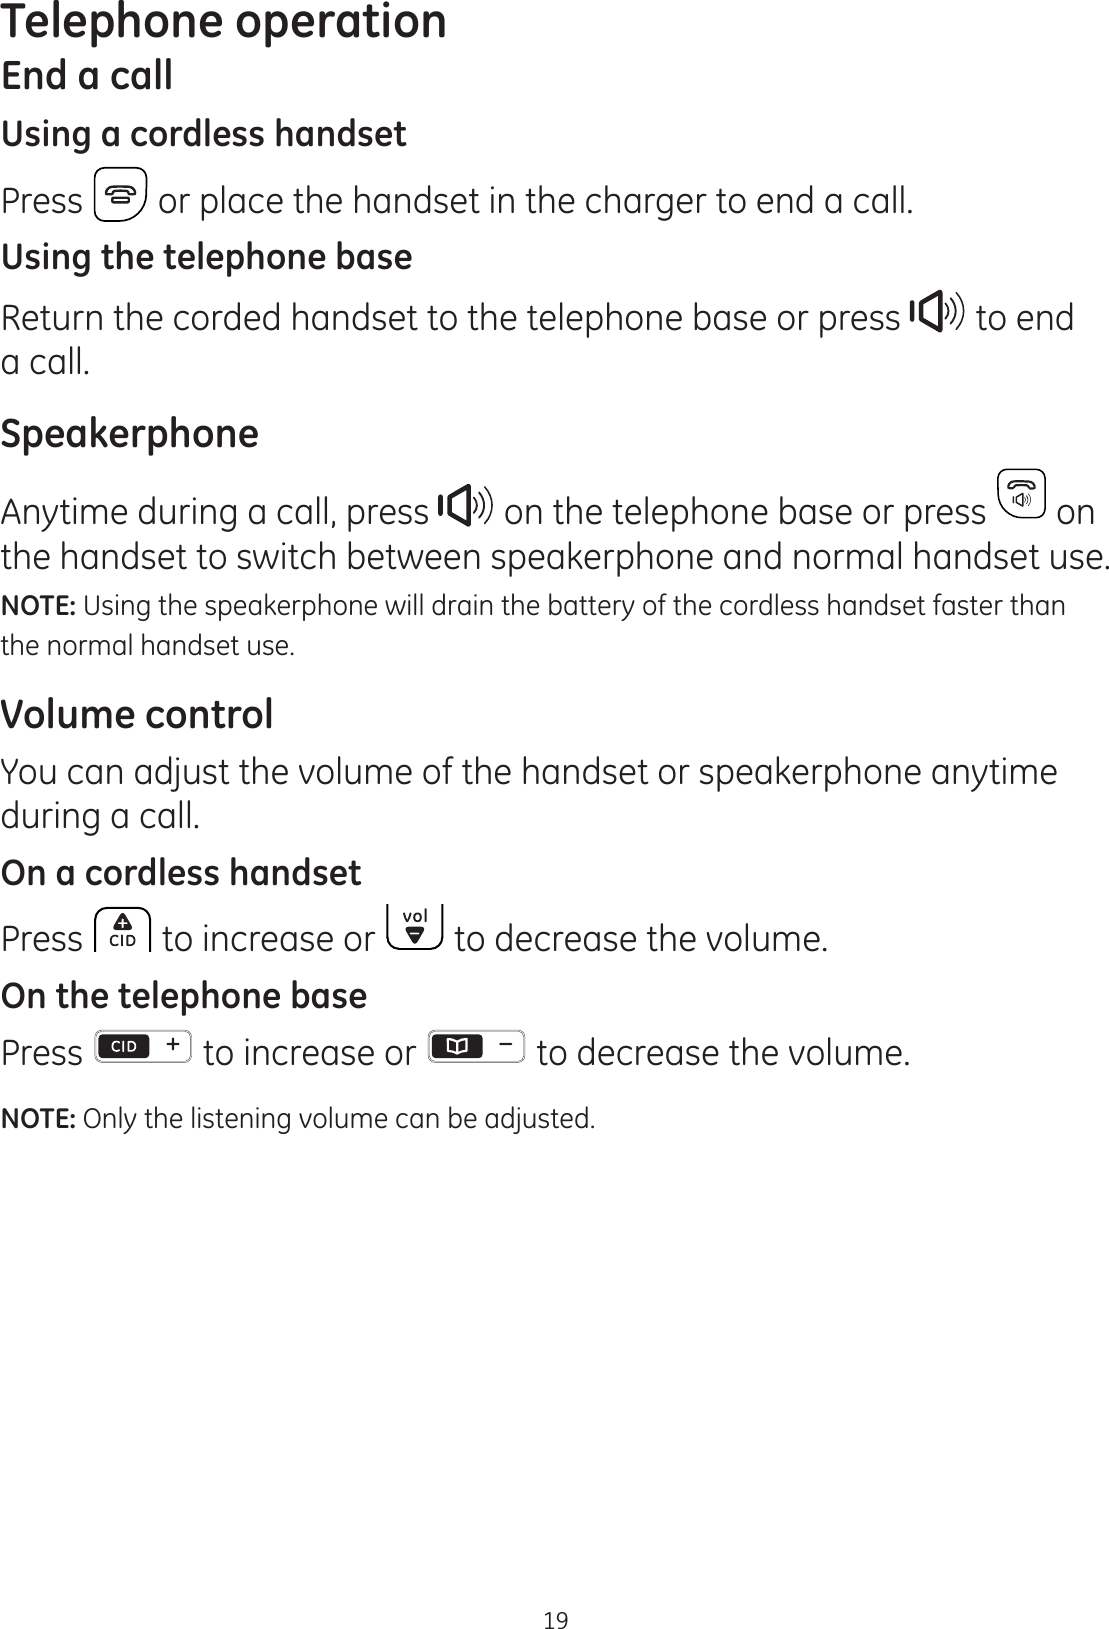 Telephone operation19End a callUsing a cordless handsetPress   or place the handset in the charger to end a call.Using the telephone baseReturn the corded handset to the telephone base or press  to end a call. SpeakerphoneAnytime during a call, press   on the telephone base or press   on the handset to switch between speakerphone and normal handset use.NOTE: Using the speakerphone will drain the battery of the cordless handset faster than the normal handset use.Volume controlYou can adjust the volume of the handset or speakerphone anytime during a call.On a cordless handsetPress   to increase or   to decrease the volume. On the telephone basePress   to increase or   to decrease the volume.NOTE: Only the listening volume can be adjusted.